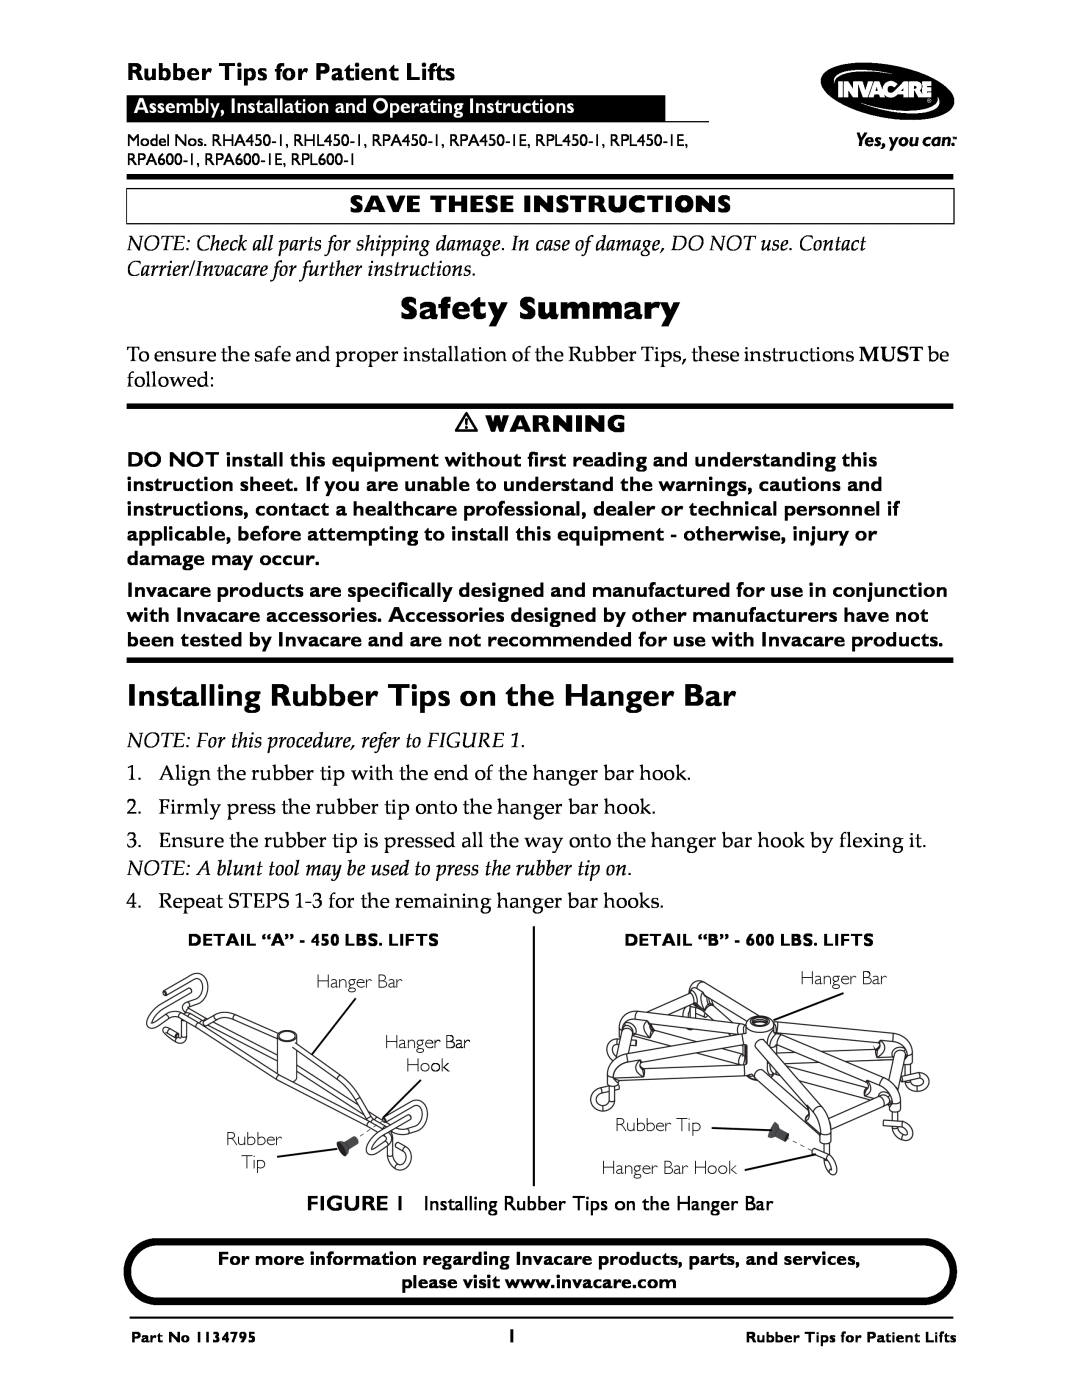 Invacare RHL450-1 instruction sheet Safety Summary, Installing Rubber Tips on the Hanger Bar, Save These Instructions 